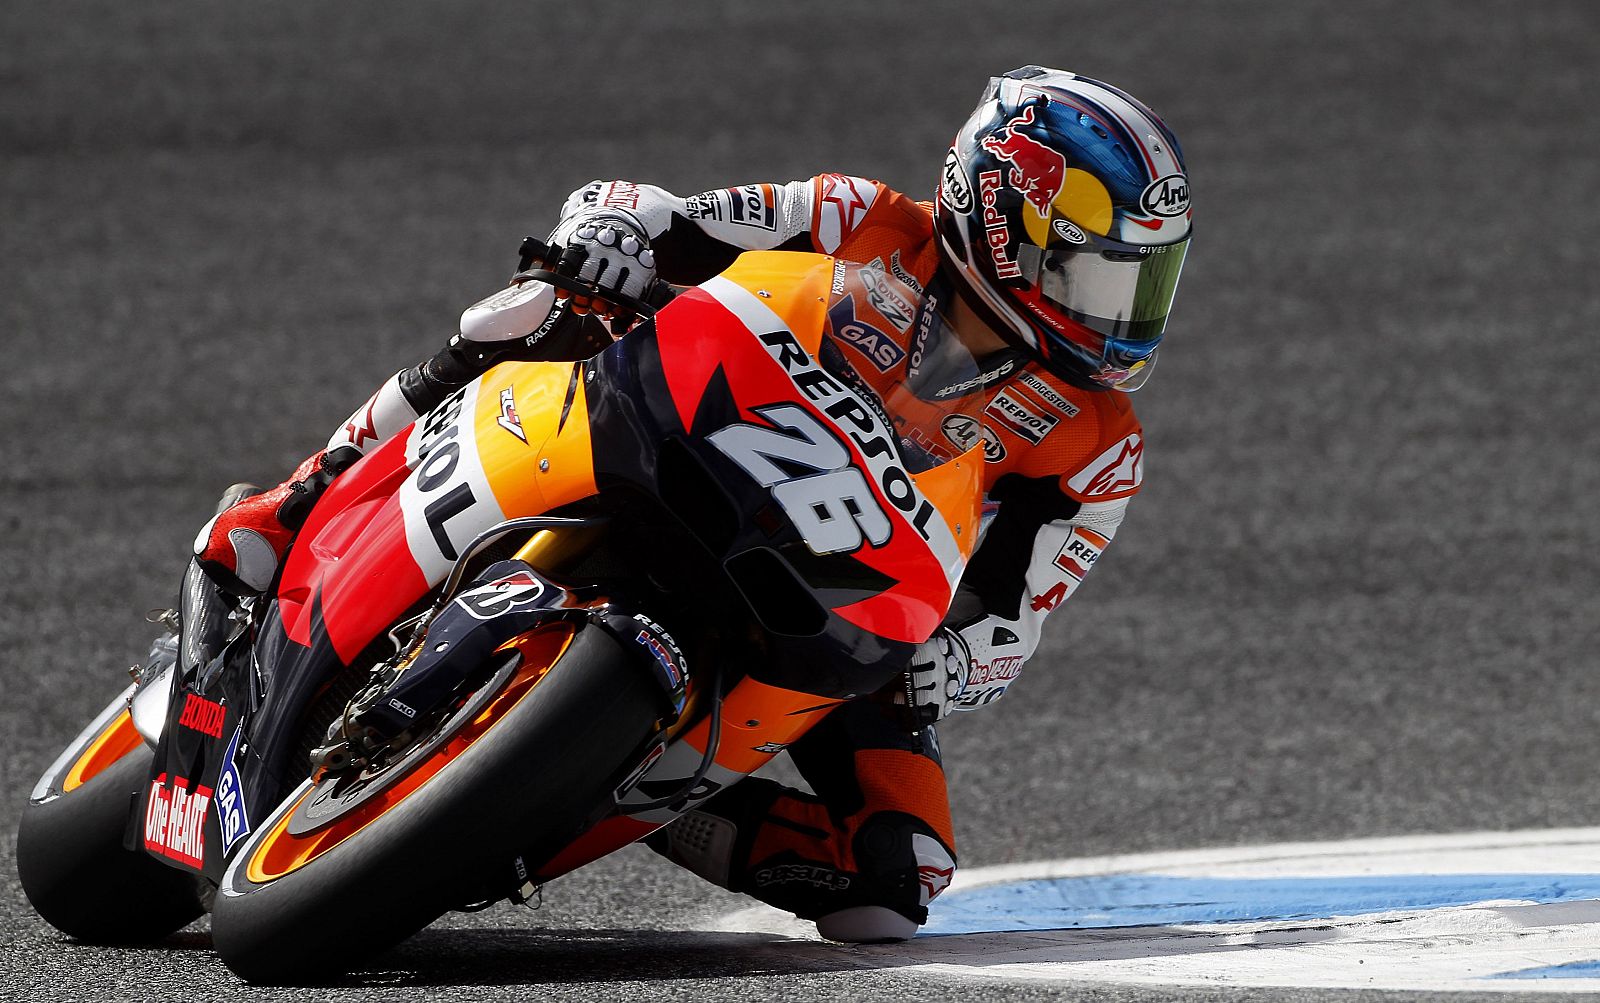 Honda MotoGP rider Pedrosa takes a curve during the first free practice session at the Portuguese Grand Prix in Estoril